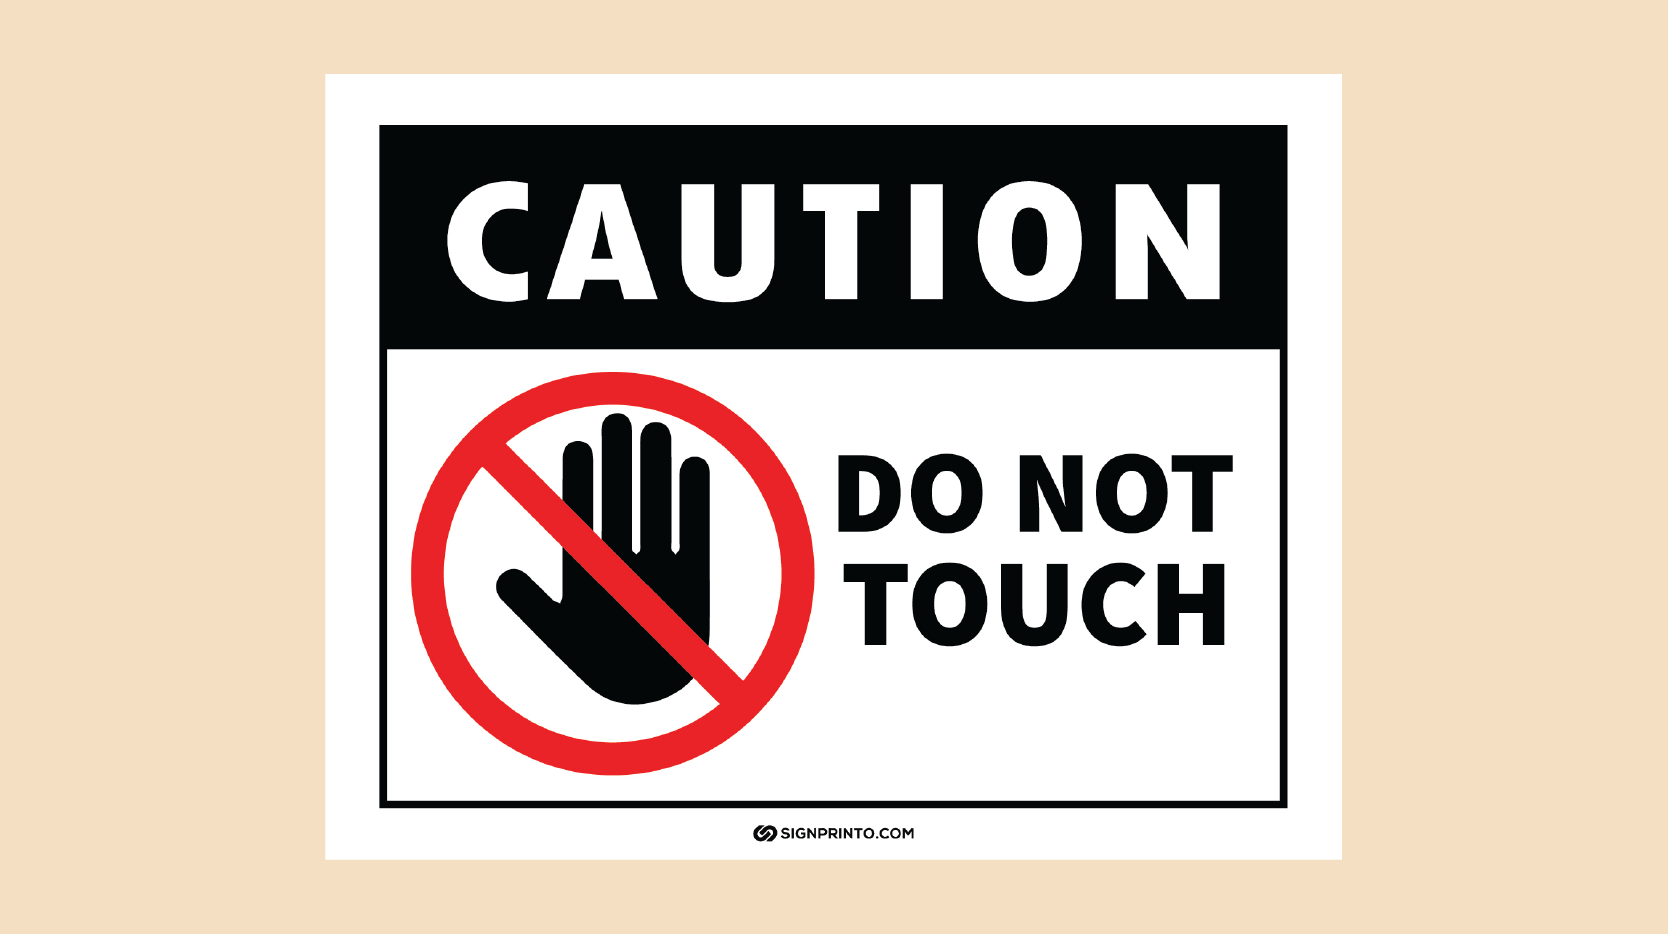 Caution Do Not Touch Sign